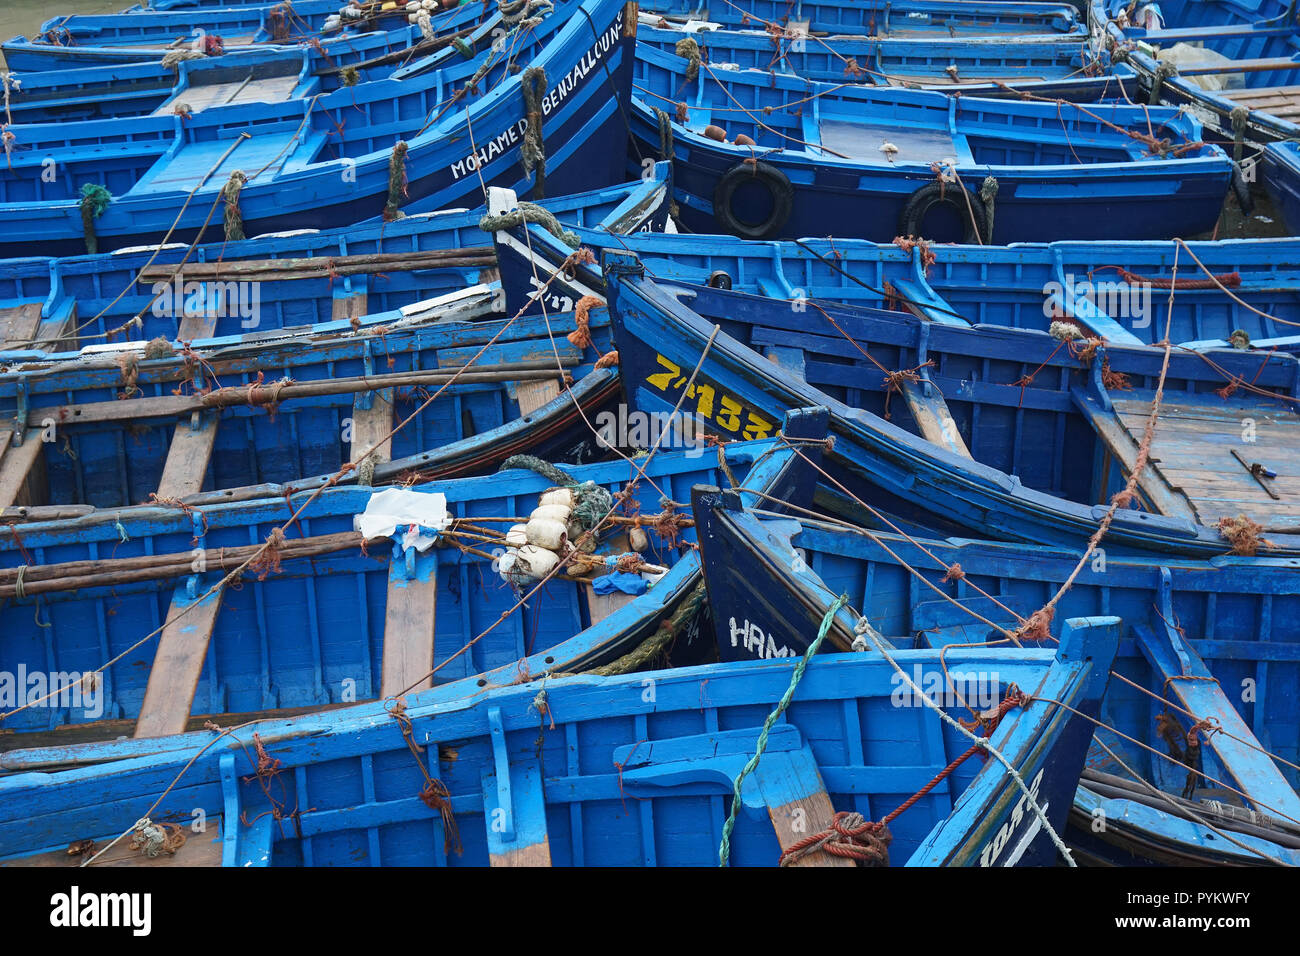 Blue wooden fishing boats in fishing port of Essaouira, Morocco, Africa Stock Photo